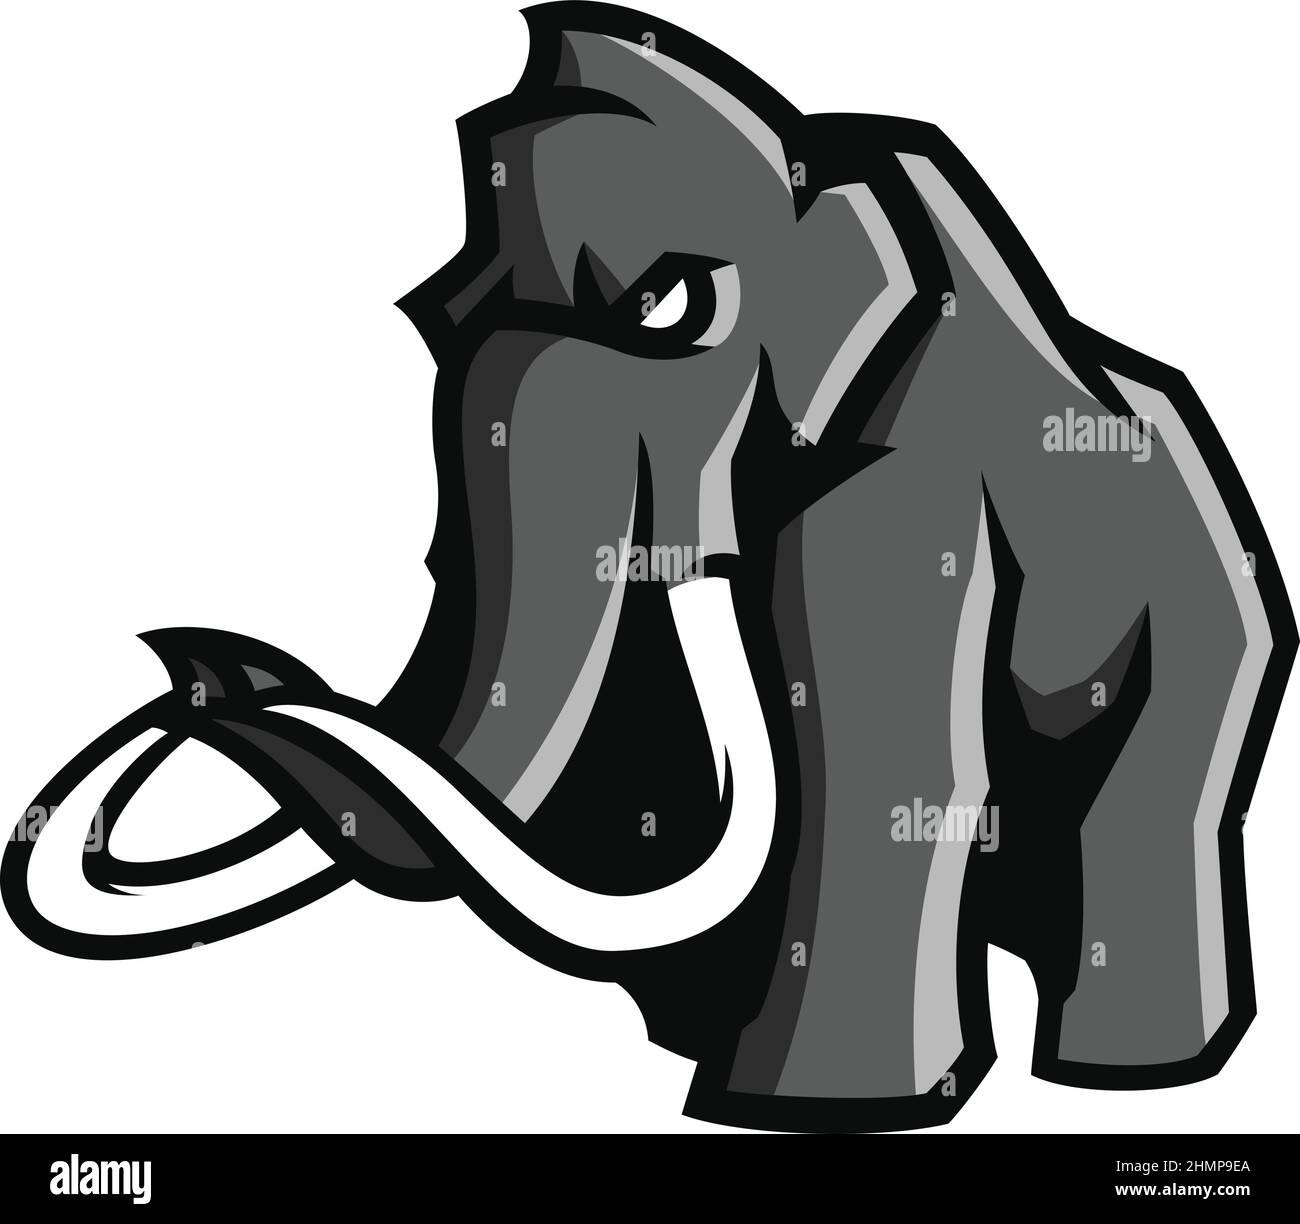 Edgy Design of Mammoth with Giant Ivory (Tusks) Stock Vector